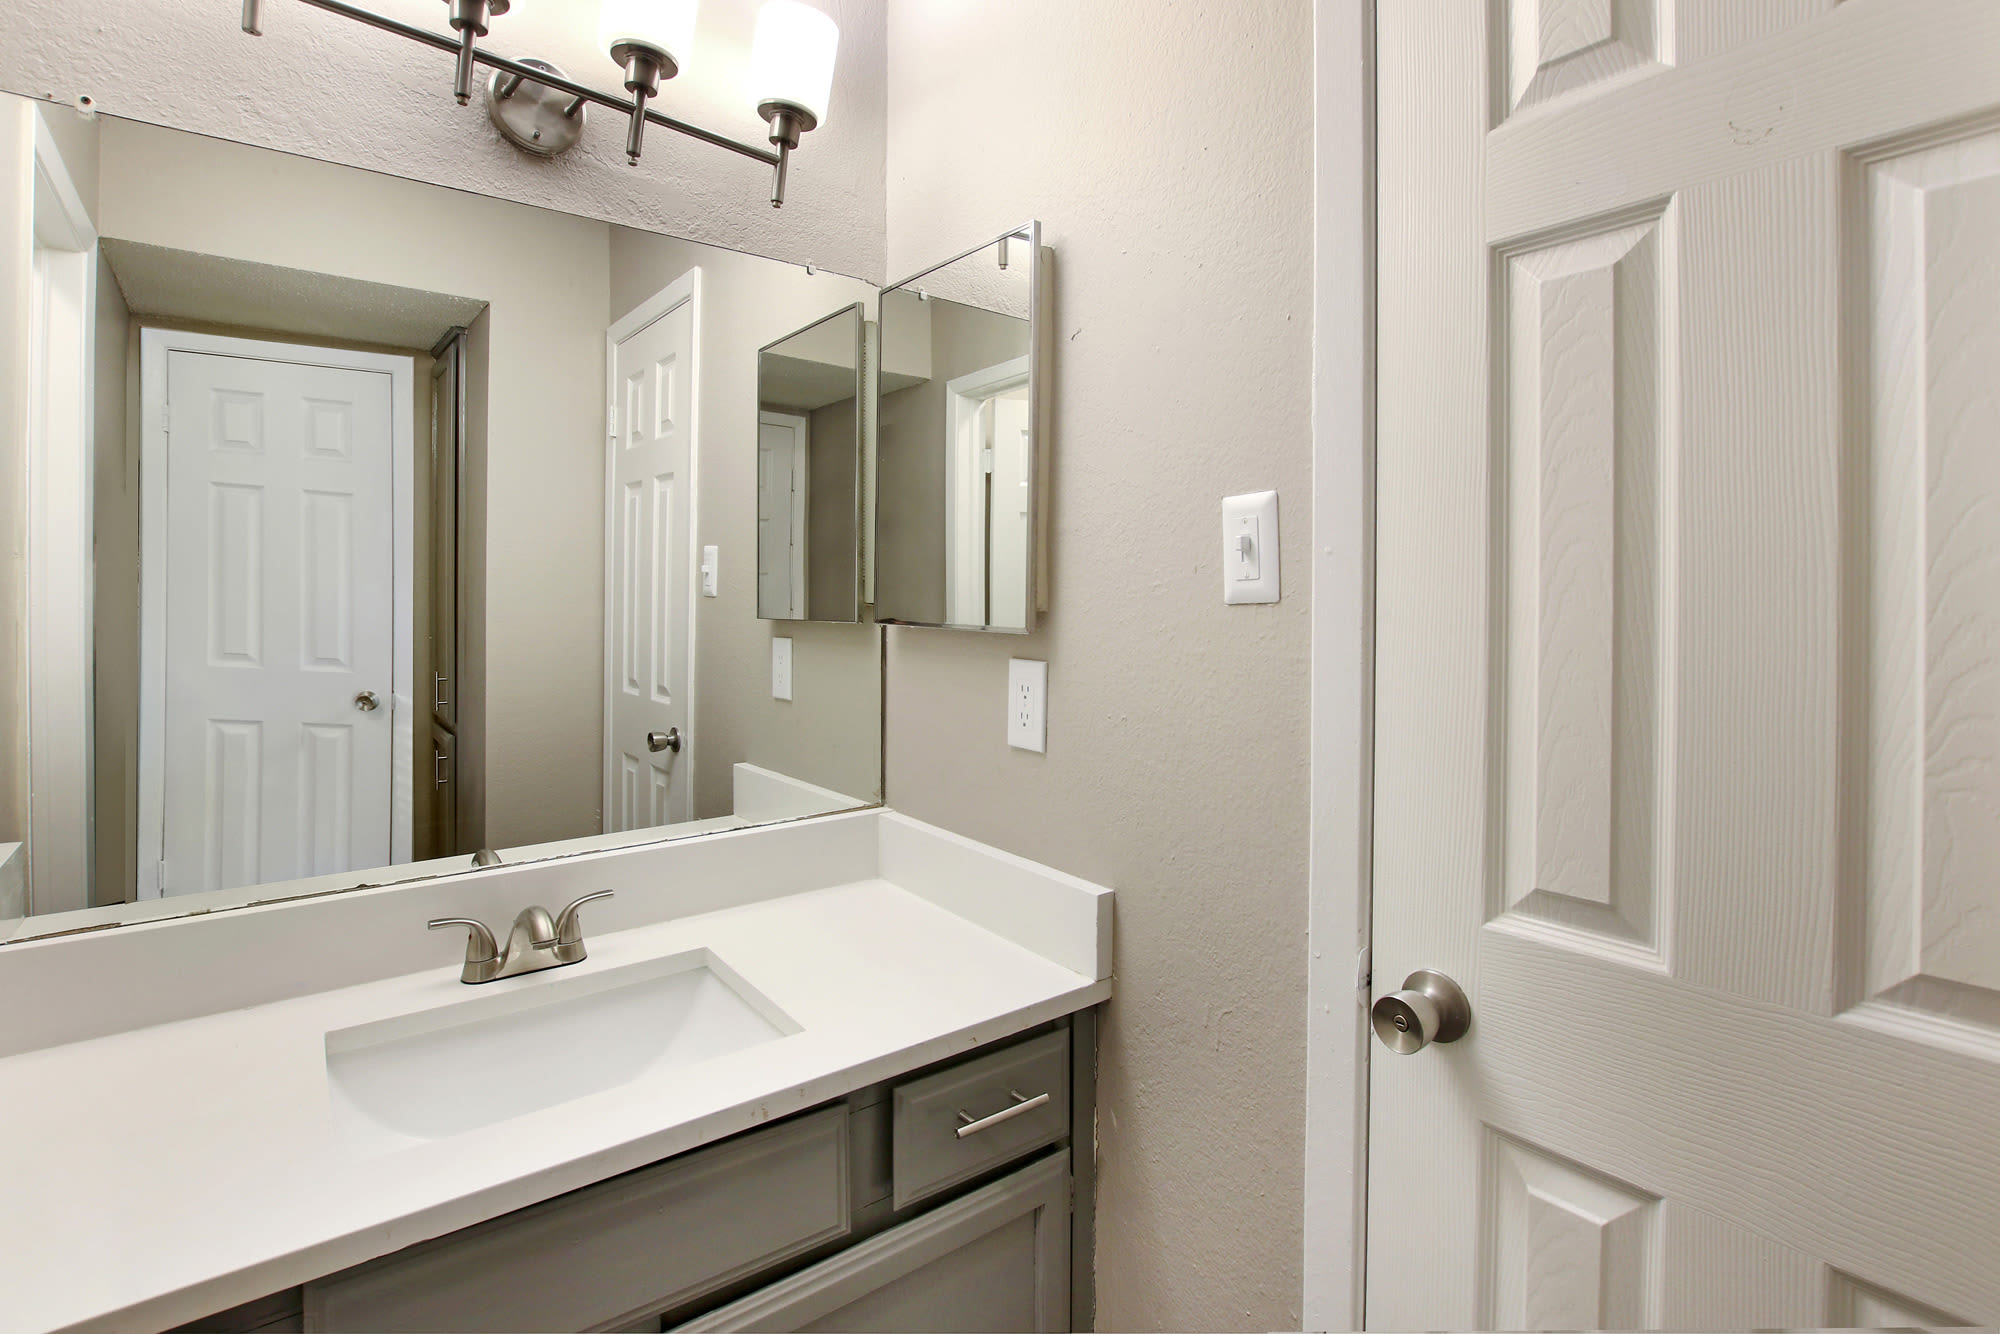 Bathroom with nice countertop at Fiona Apartment Homes in Irving, Texas